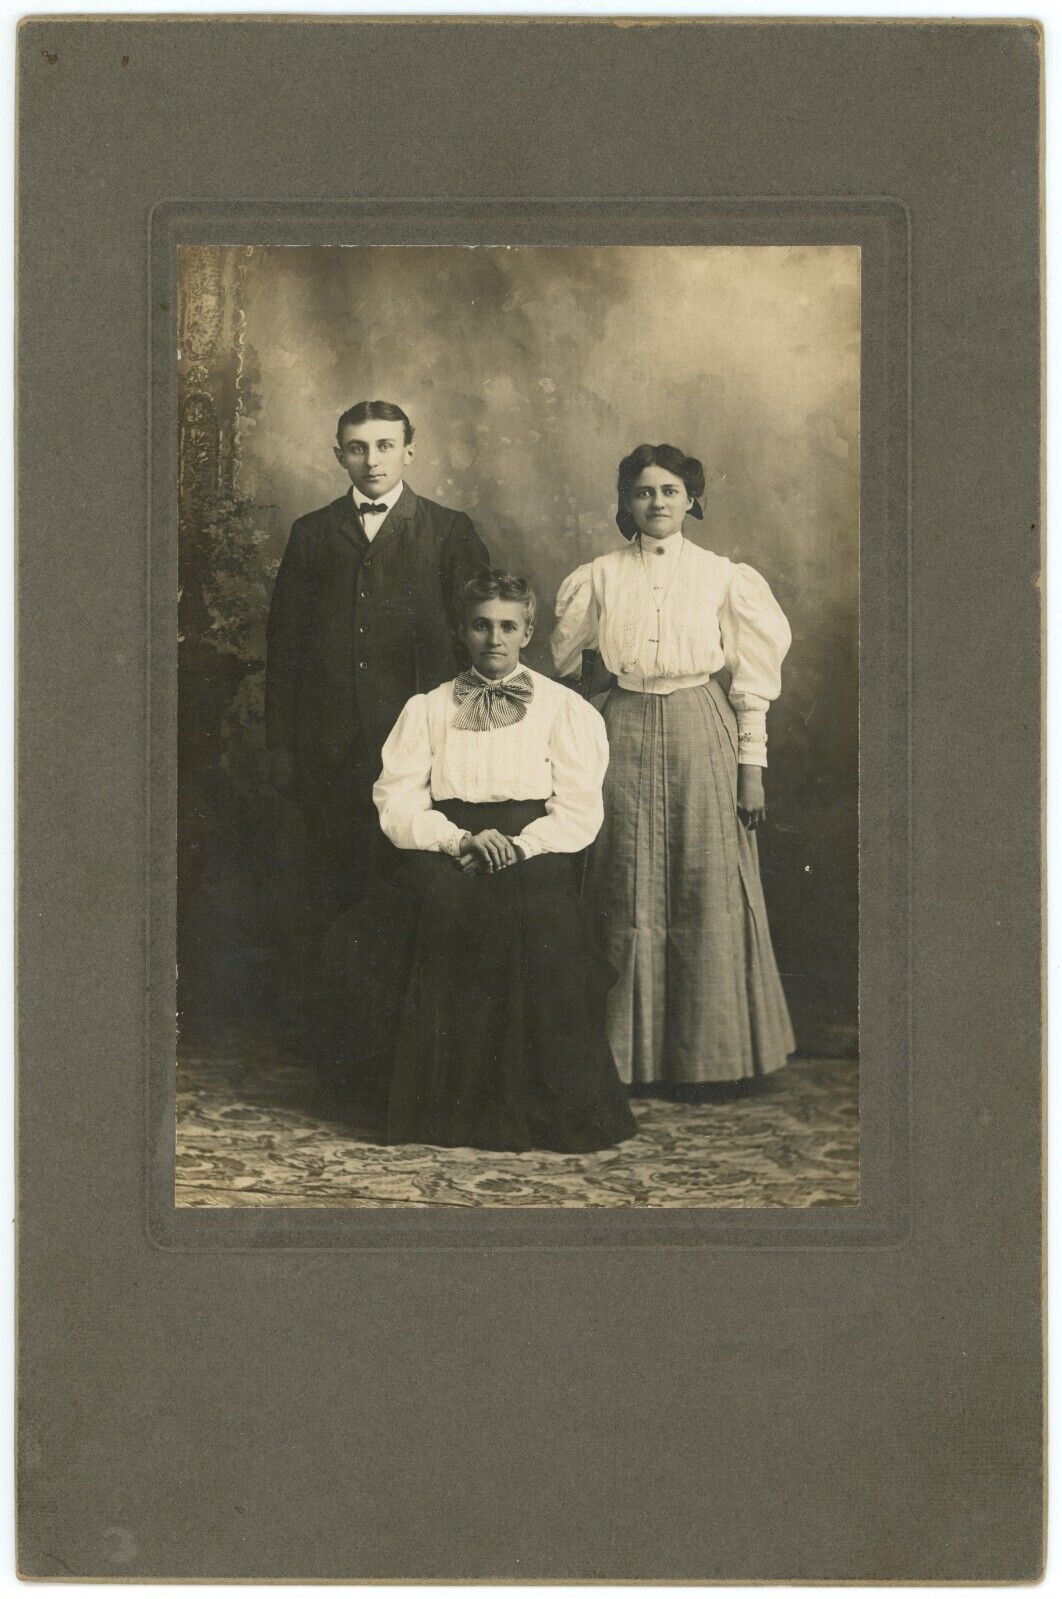 CIRCA 1890'S LARGE ANTIQUE CABINET CARD OF MOTHER AND TWO GROWN CHILDREN